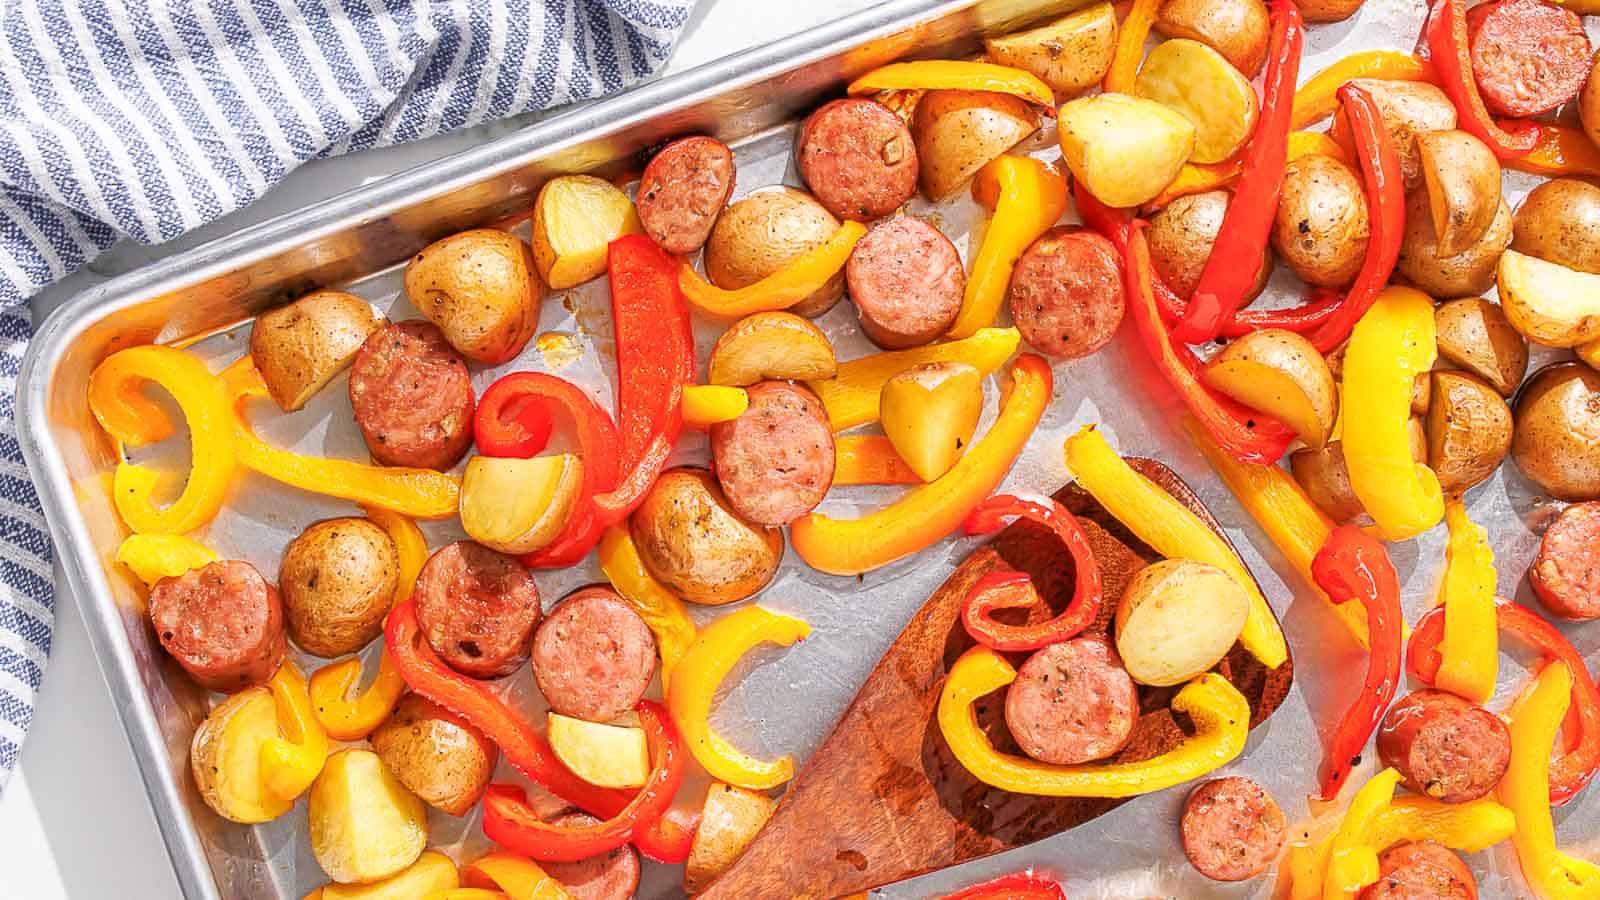 7 healthy sheet pan dinners that'll satisfy any craving